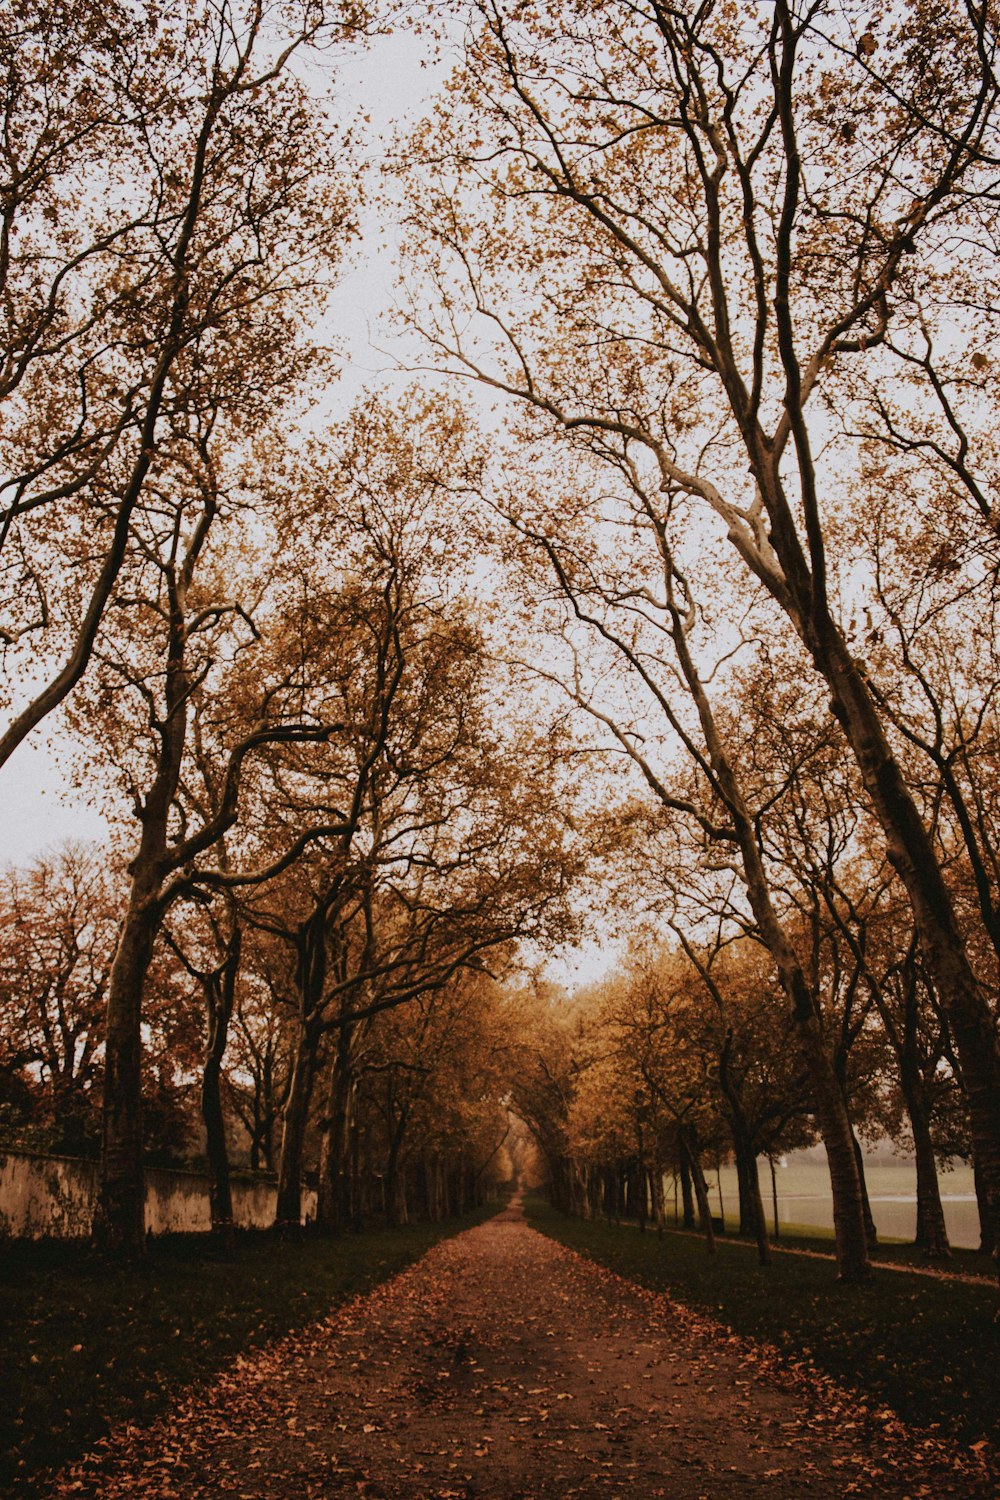 brown leafed trees and pathway